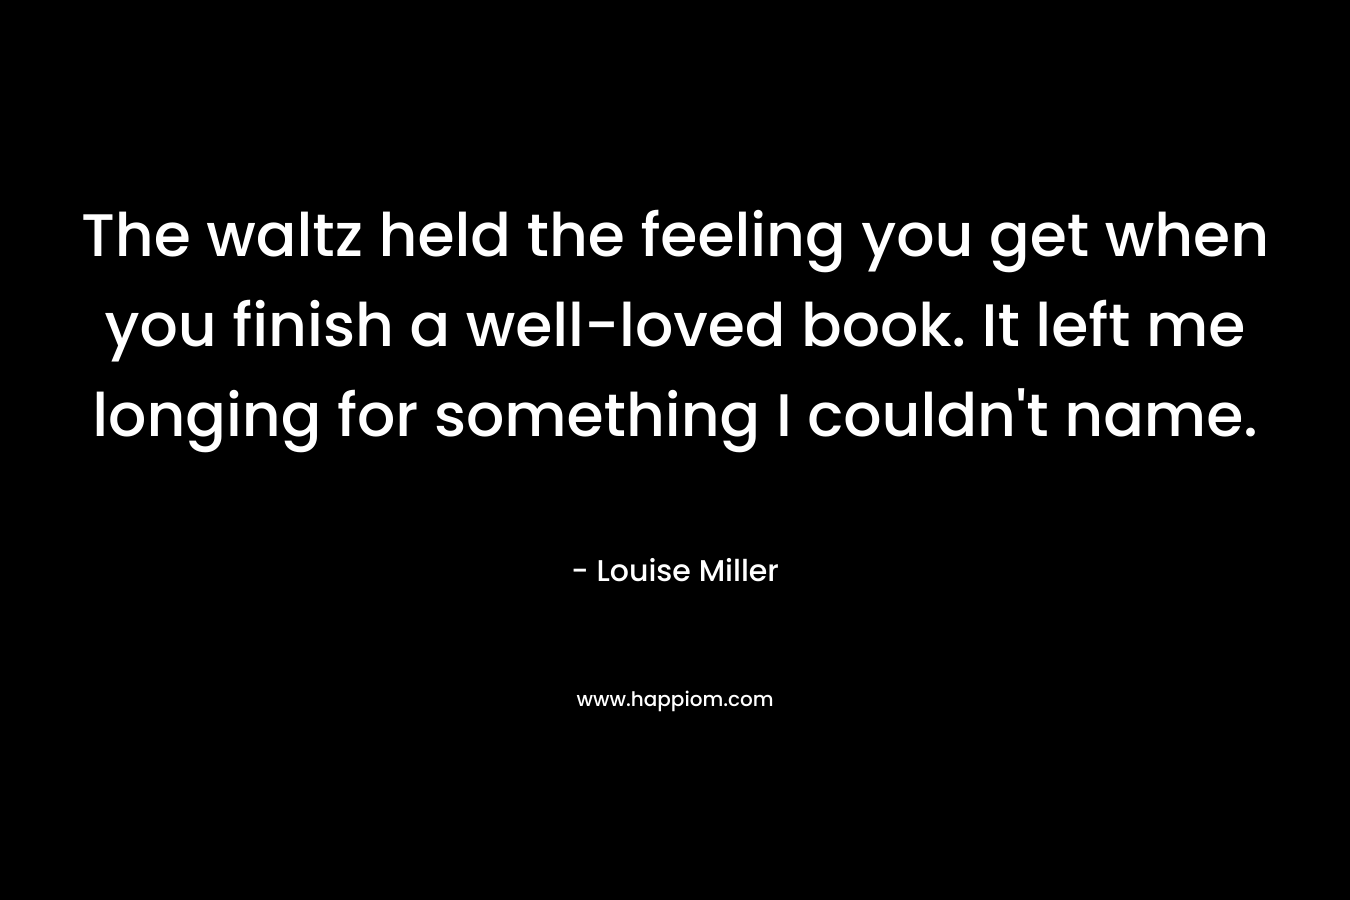 The waltz held the feeling you get when you finish a well-loved book. It left me longing for something I couldn't name.